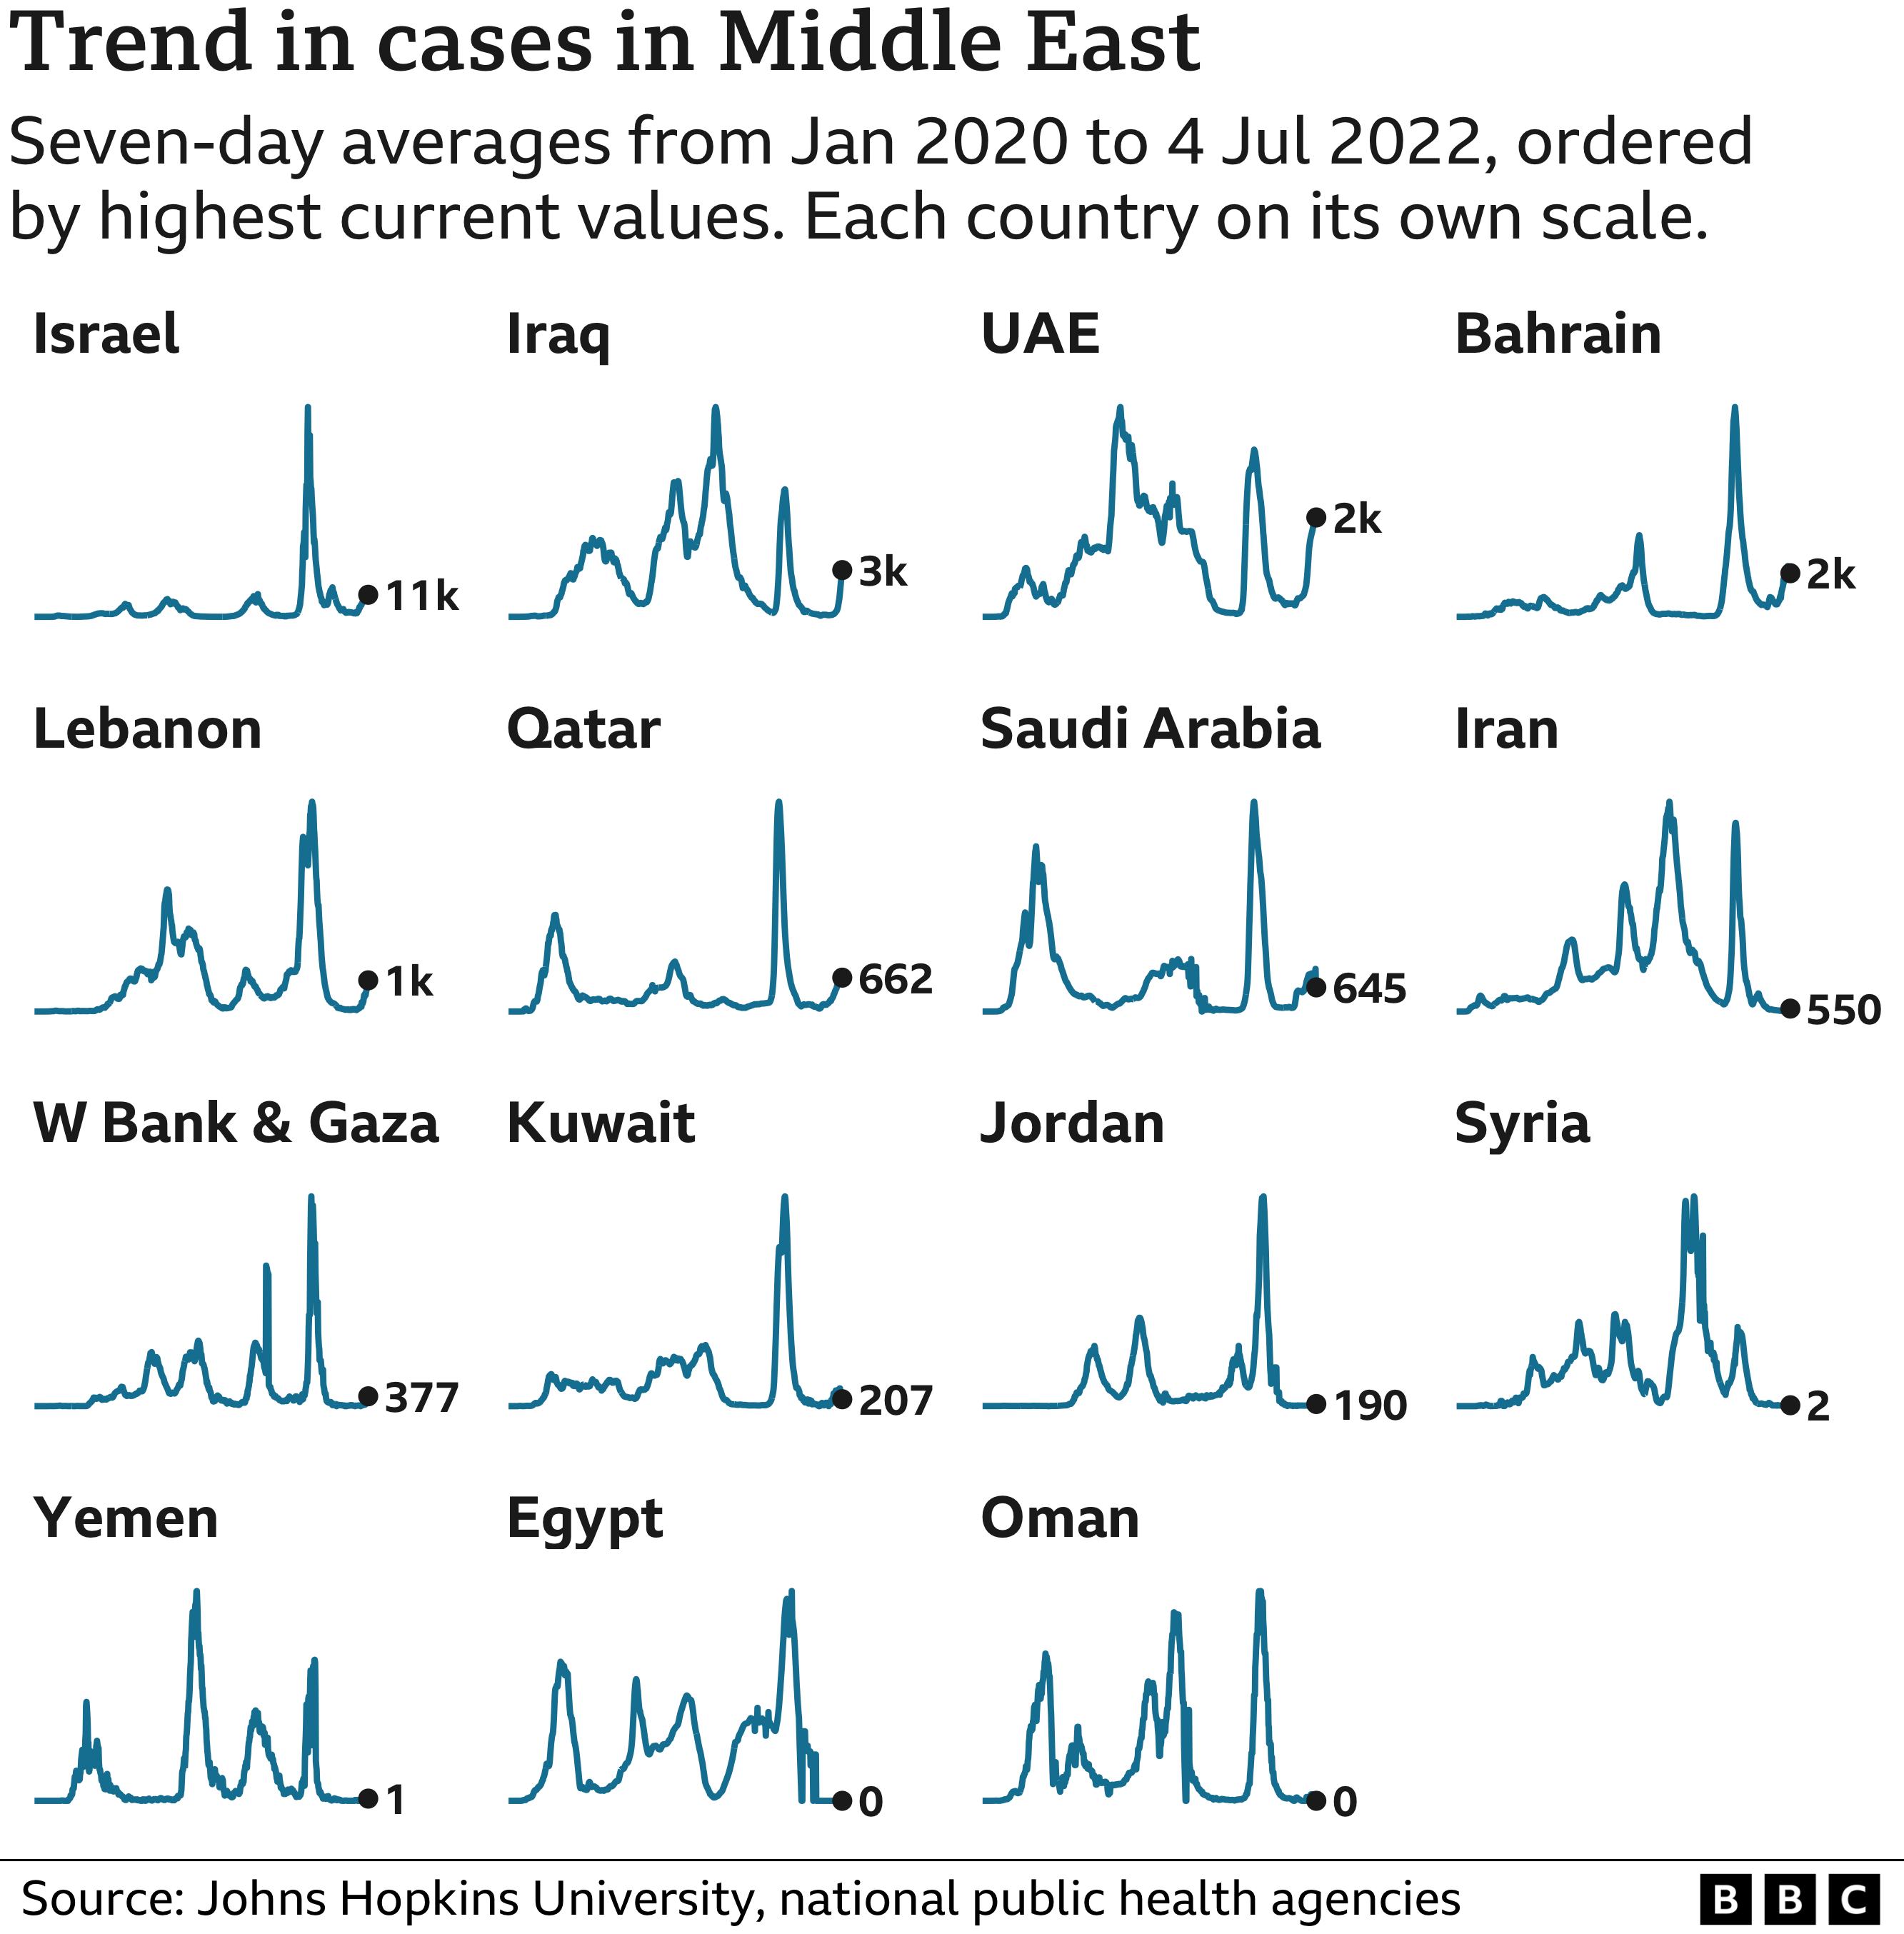 Trend in cases chart for countries in Middle East